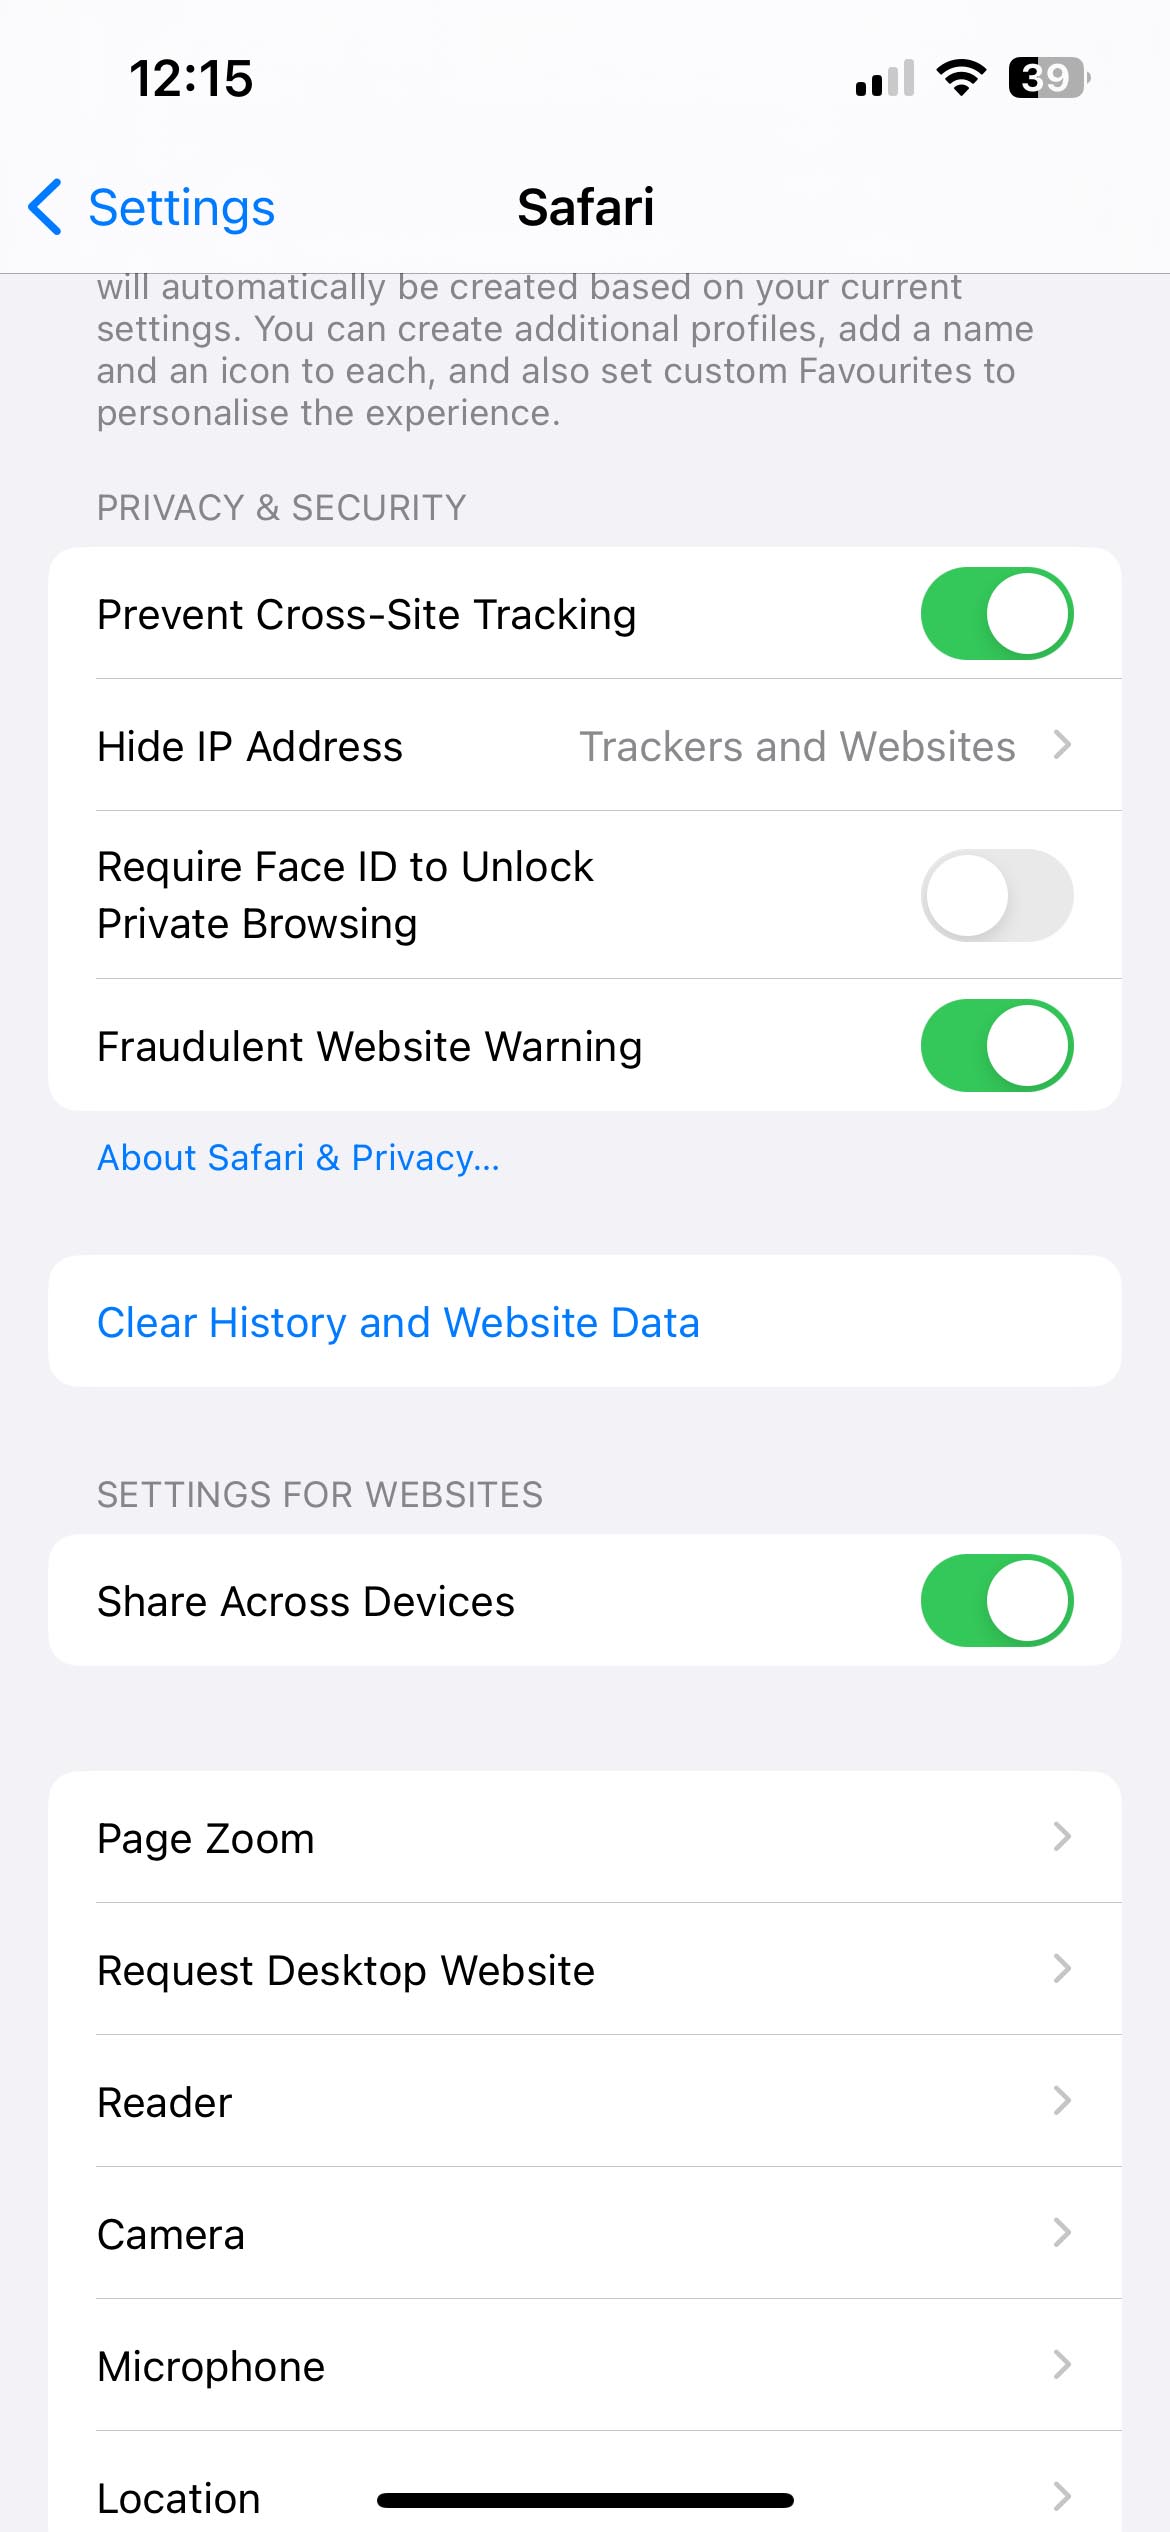 tap the Clear History and Website Data button